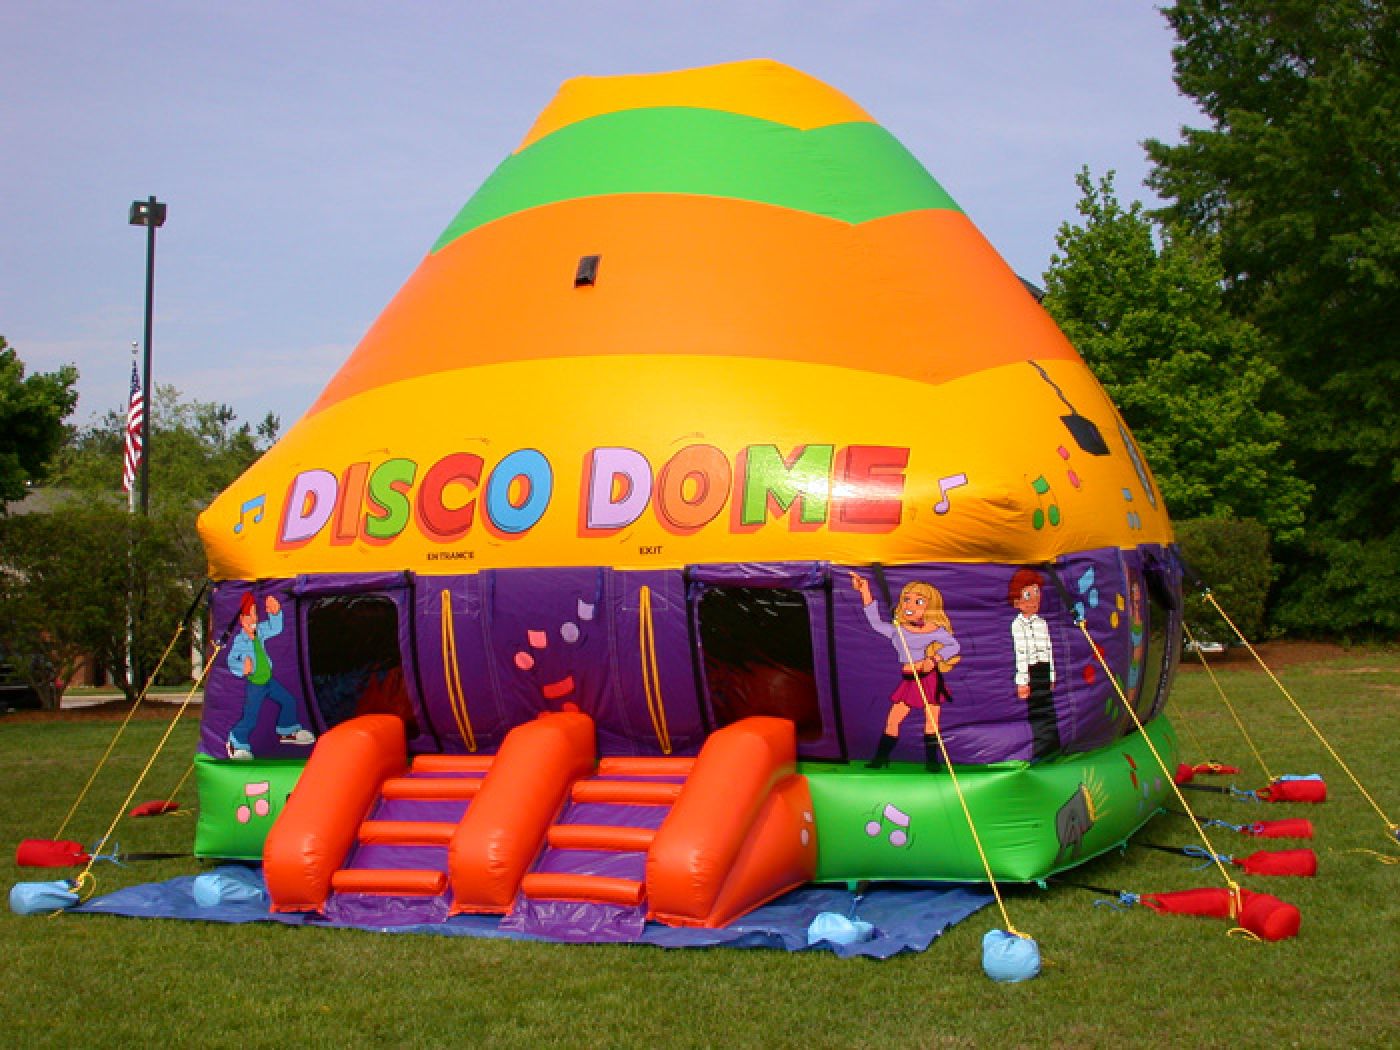 Disco Dome bounce house rental ready for event fun to begin in Raleigh